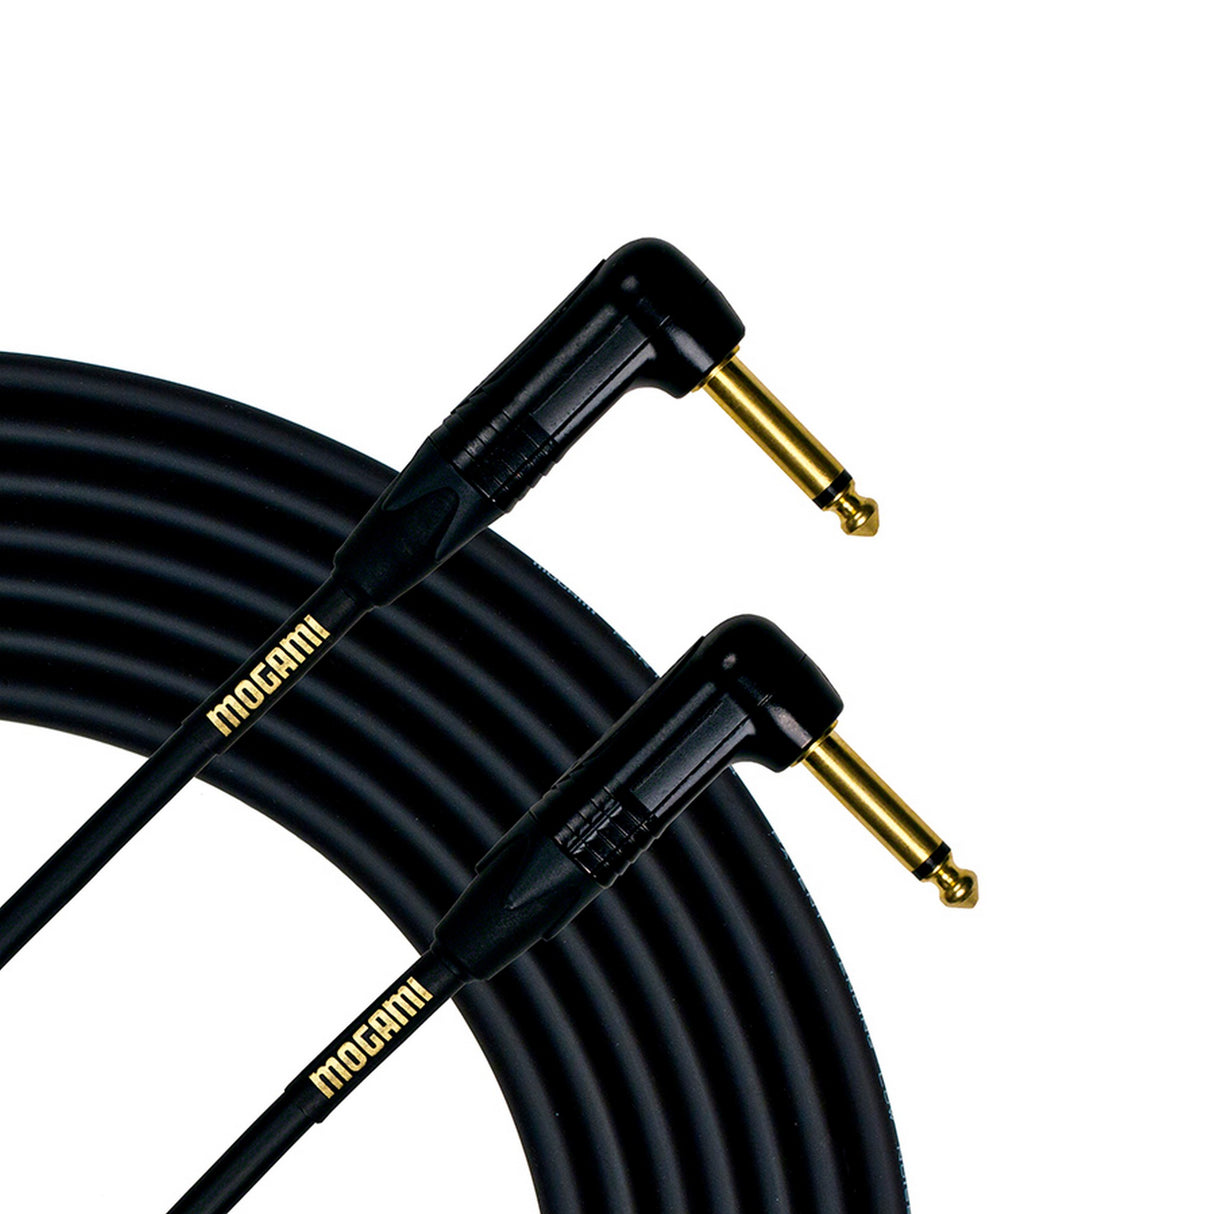 Mogami Gold Instrument-18RR Right-Angle to Right-Angle Cable, 18-Foot